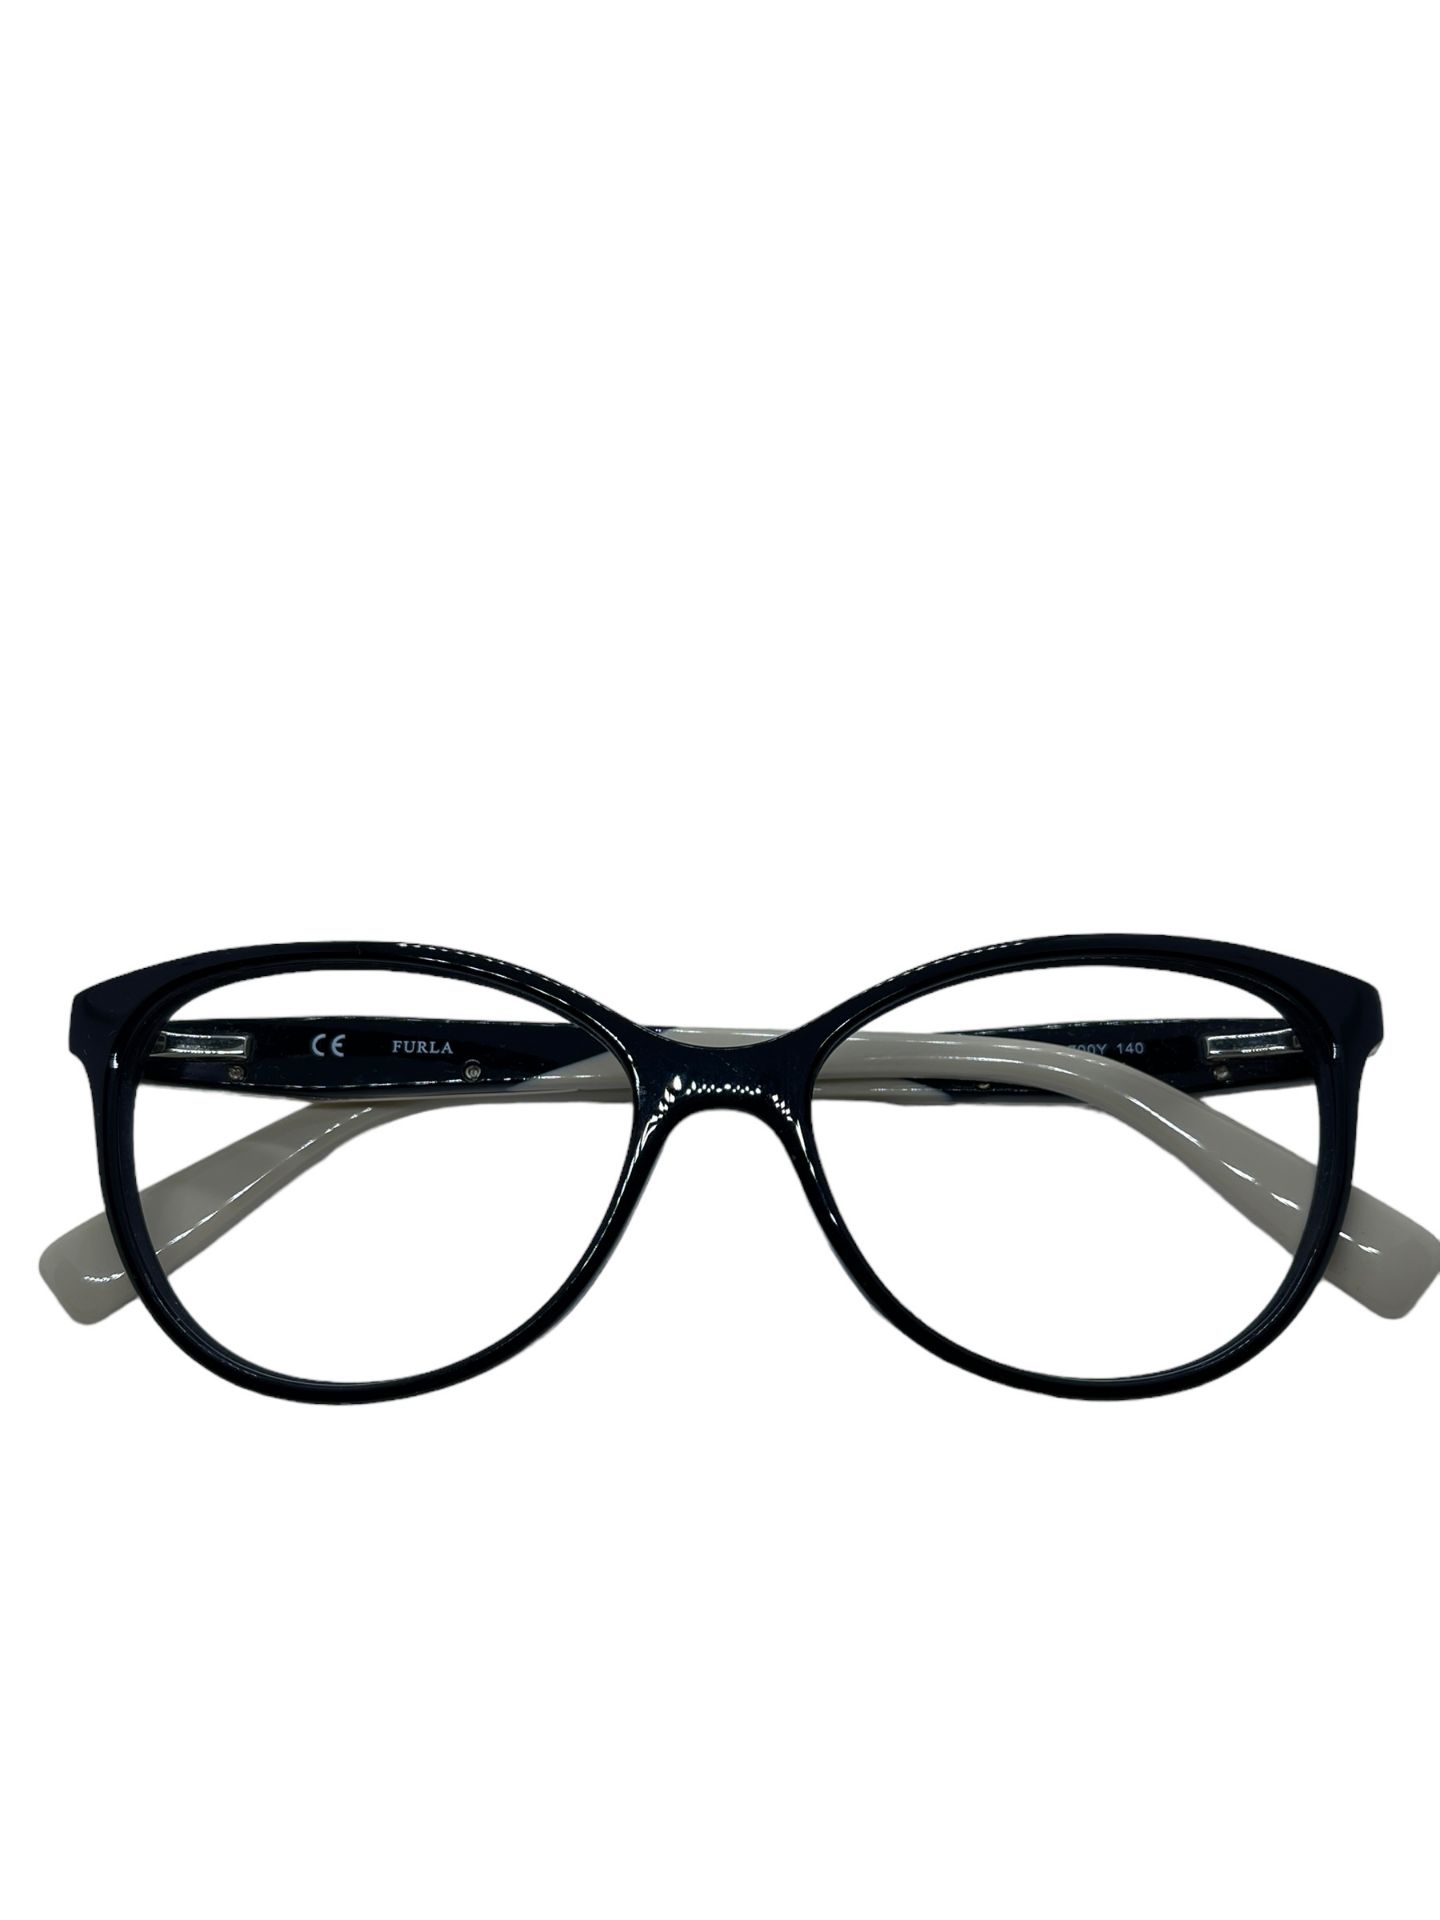 ladies fala Spectacles - Image 2 of 4